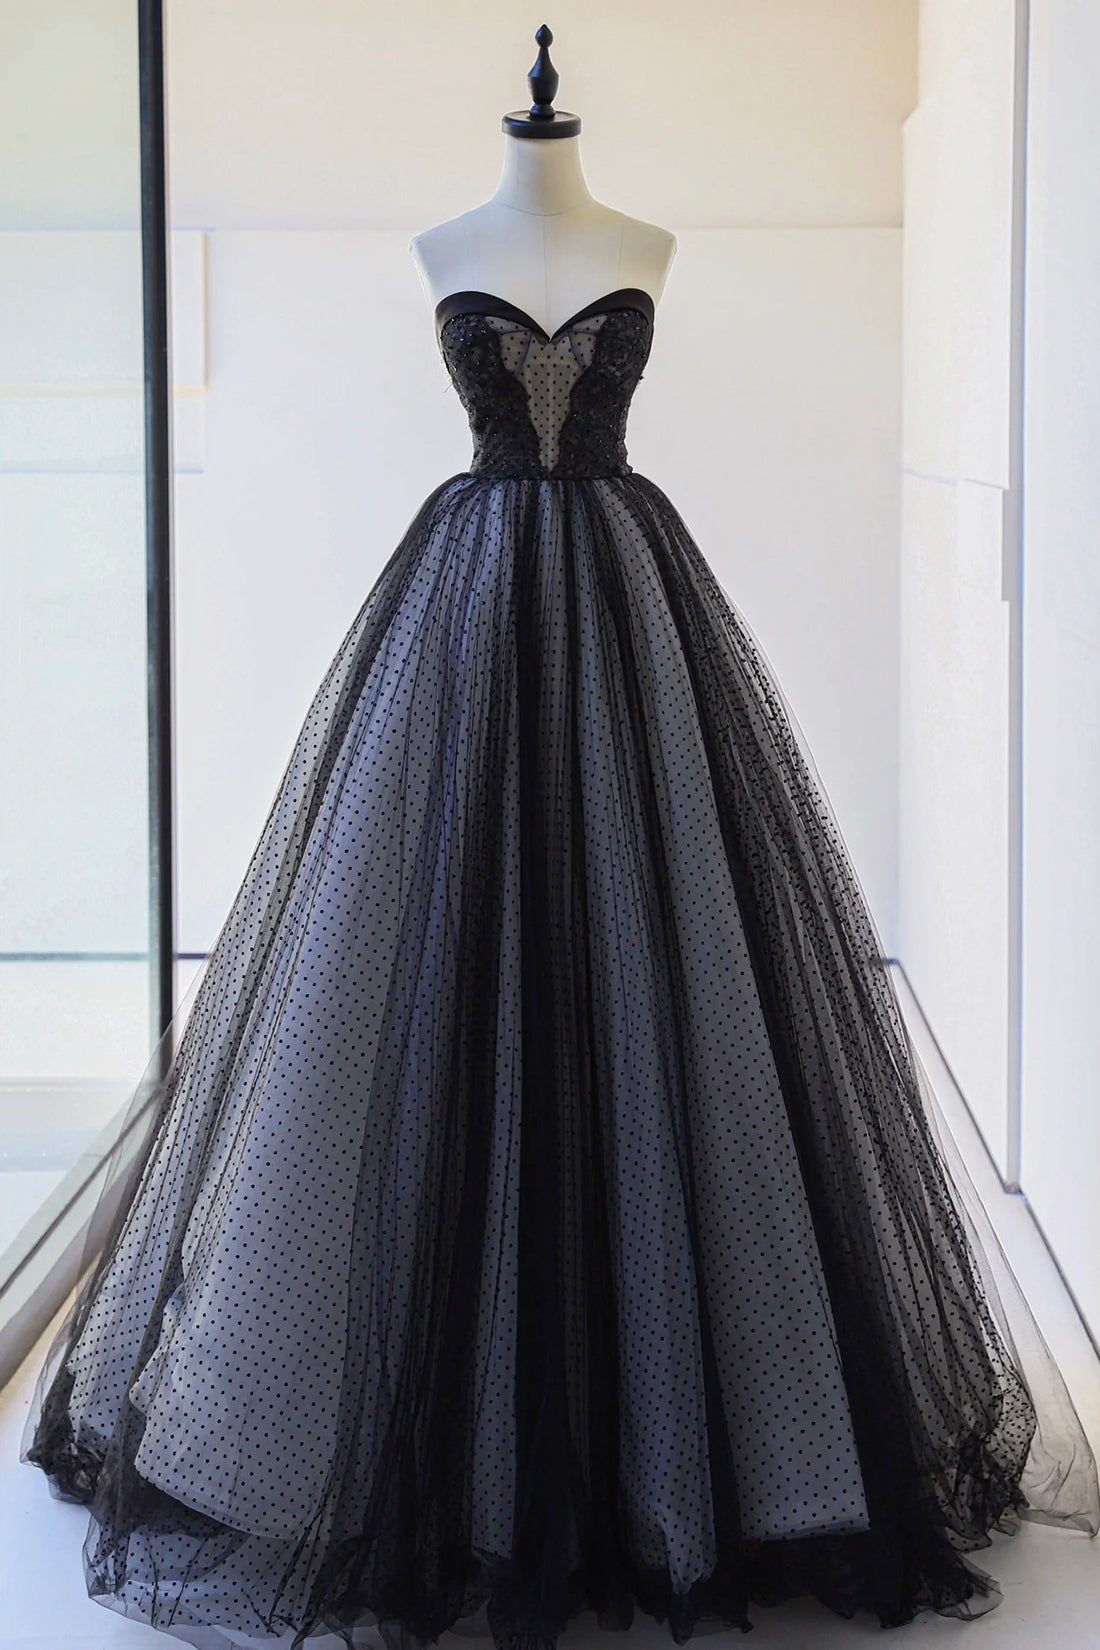 Black Strapless Tulle Lace Long Prom Dress, A-Line Sweetheart Neck Evening Party Dress